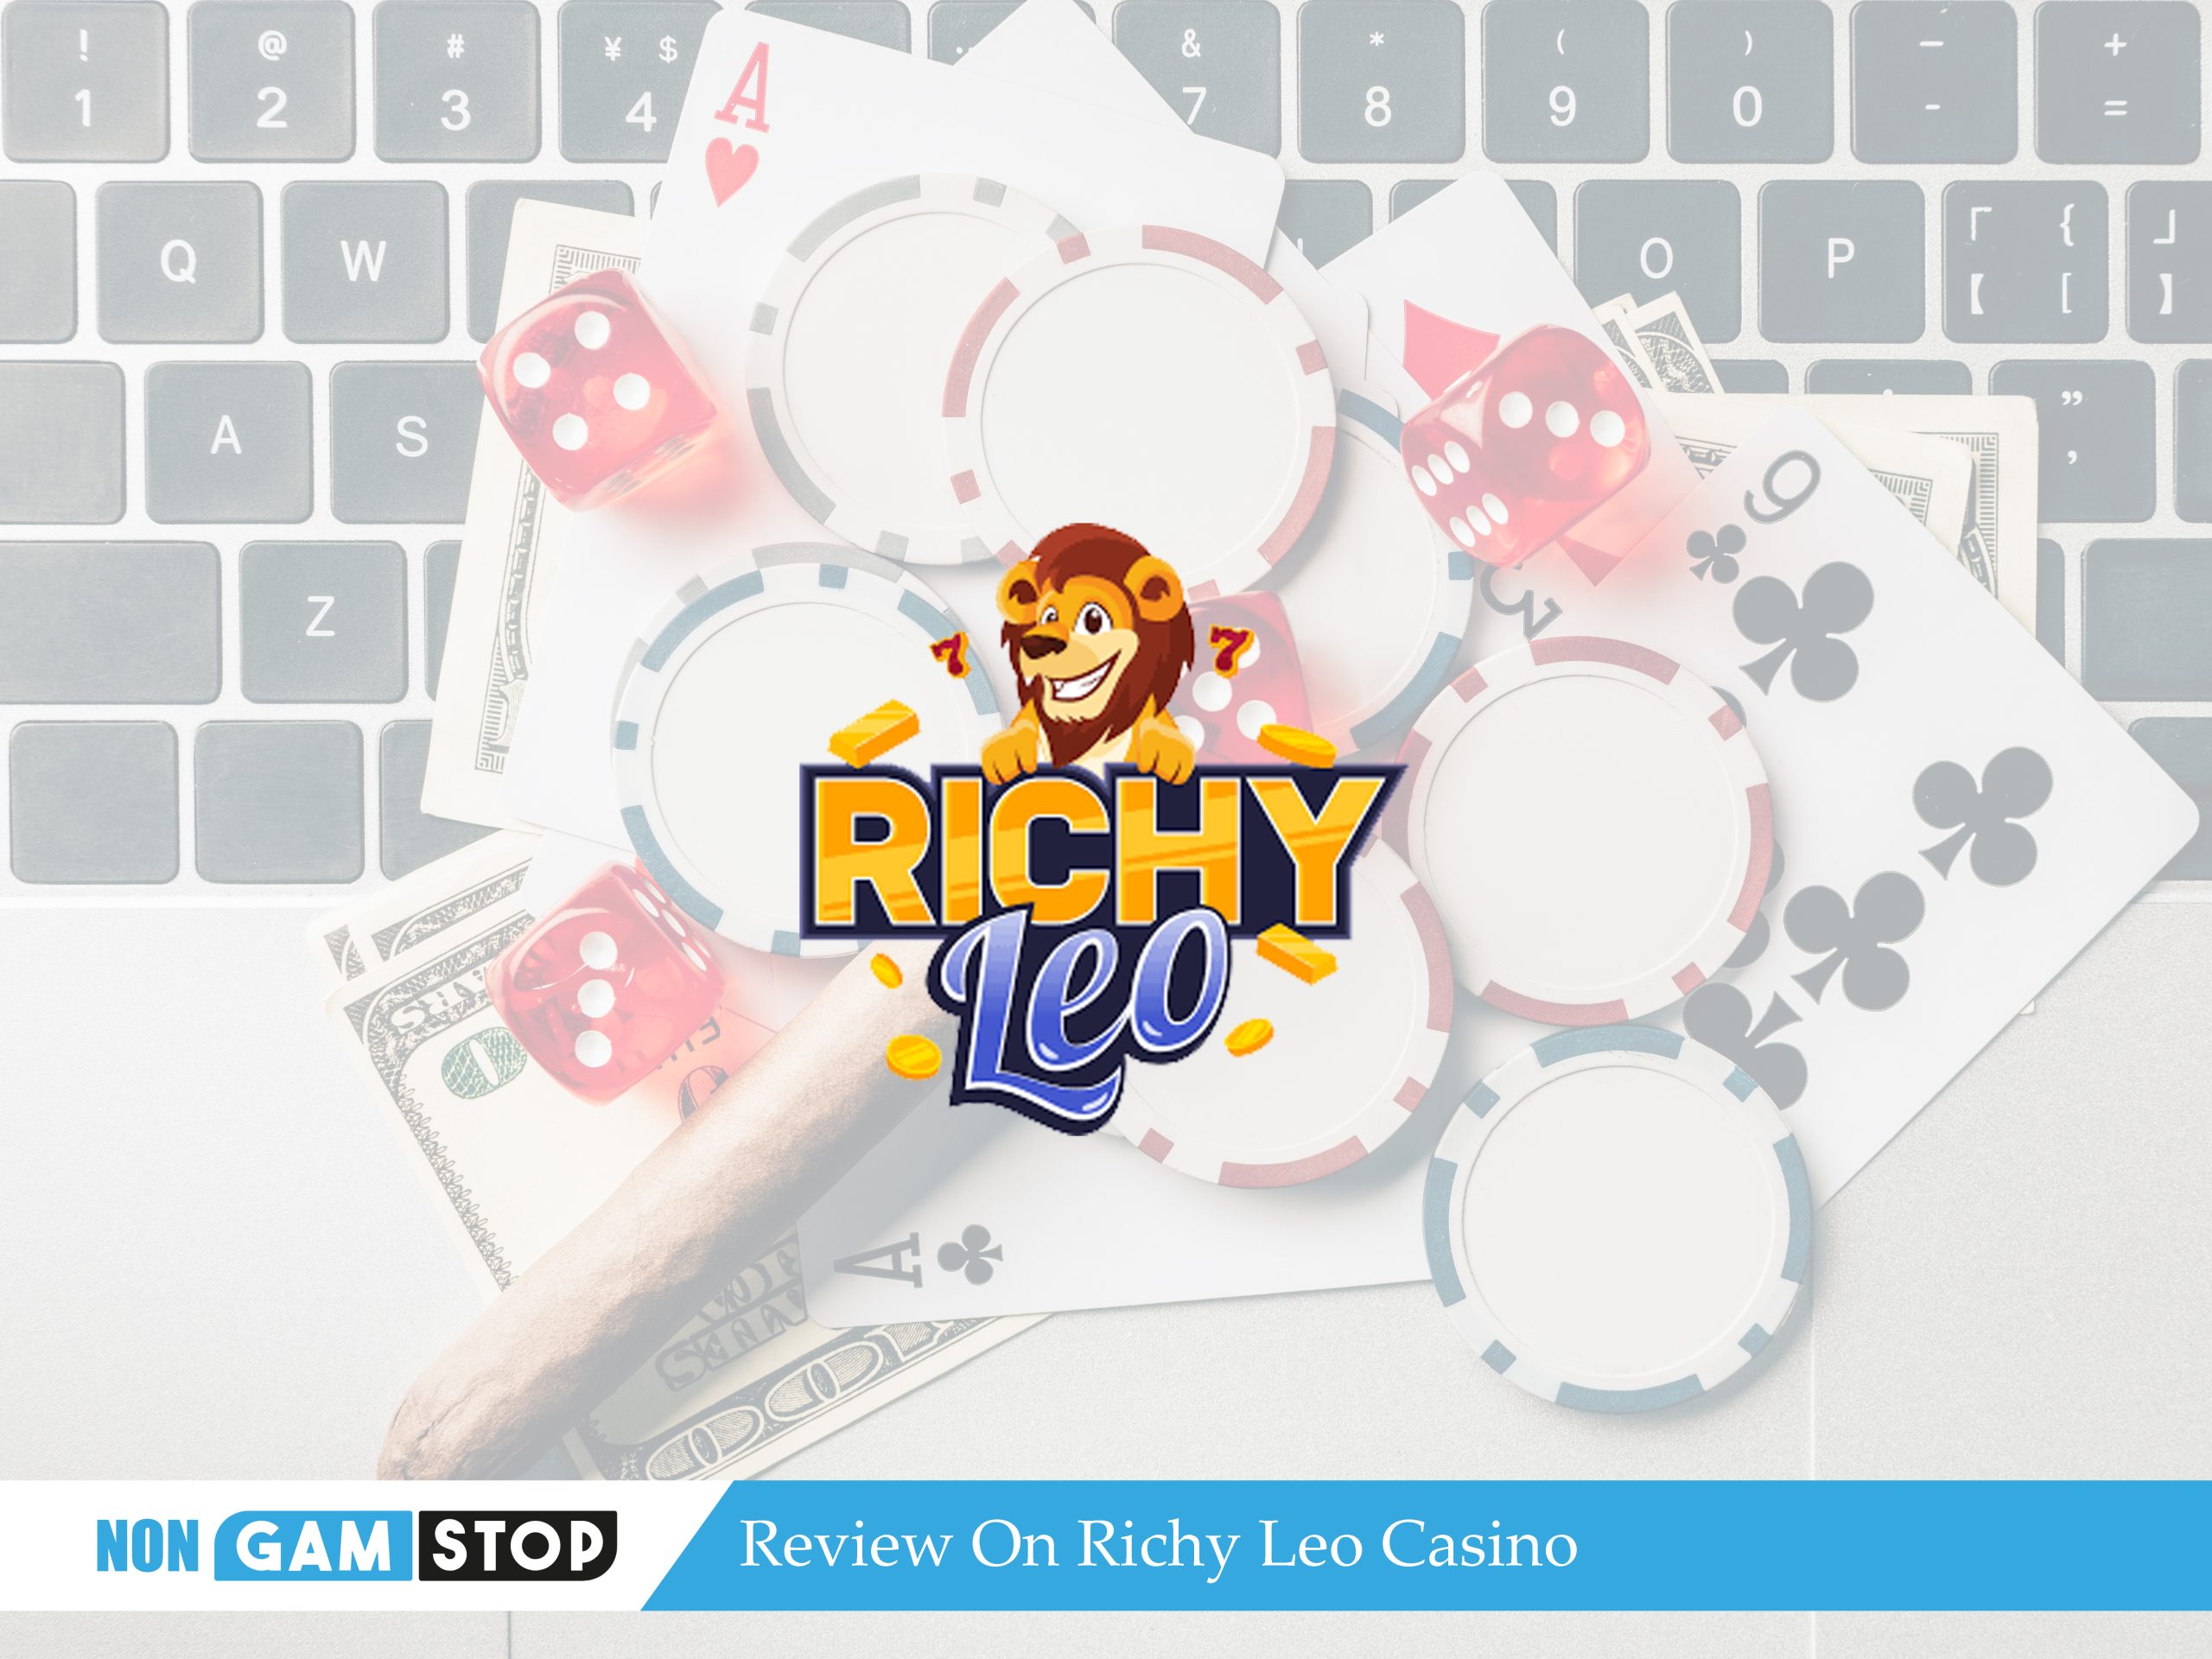 Review On Richy Leo Casino